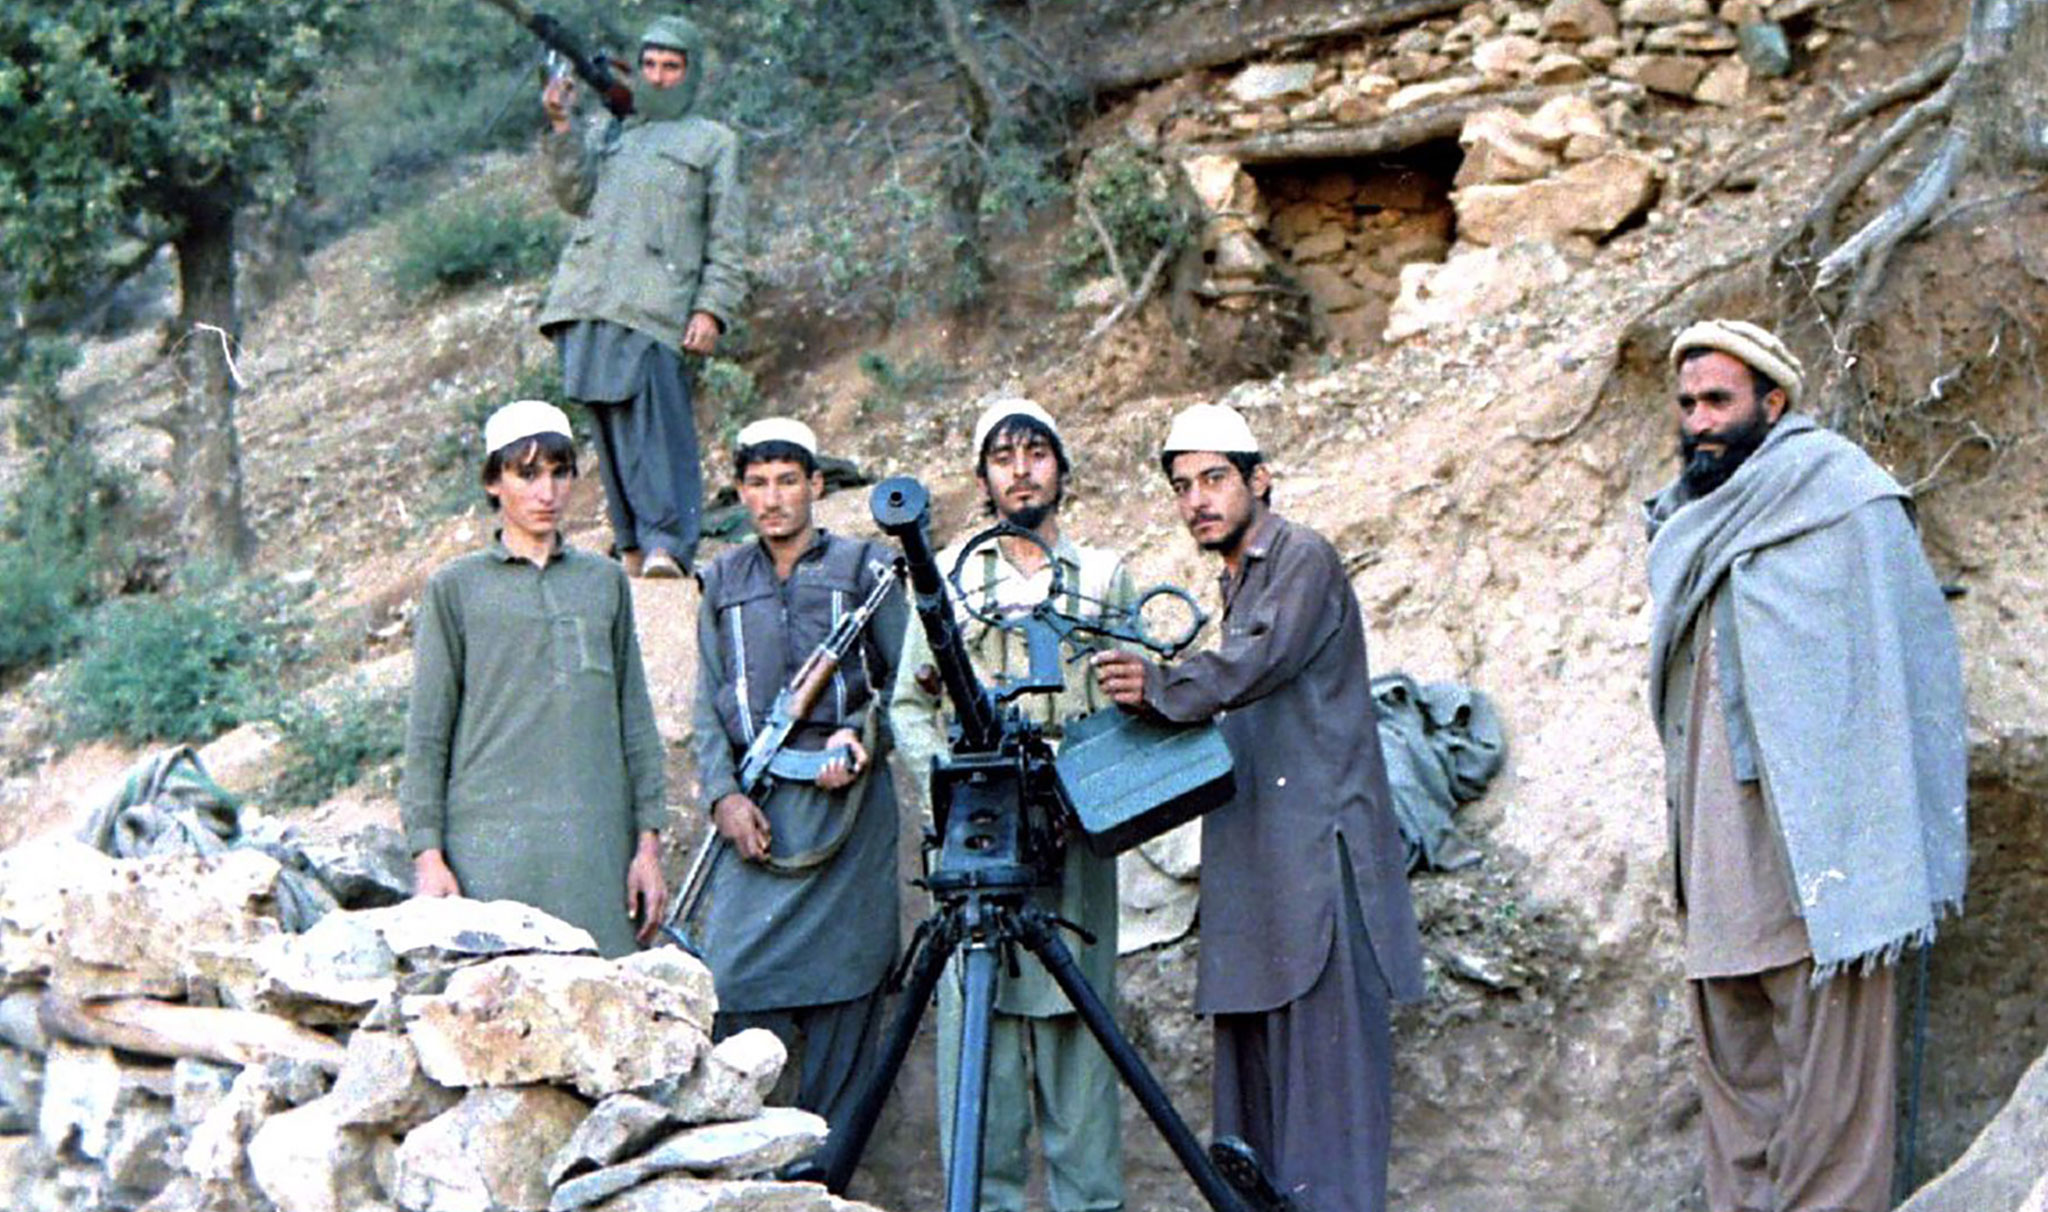 How MI6 backed ‘right-wing religious fanatics’ in Afghanistan